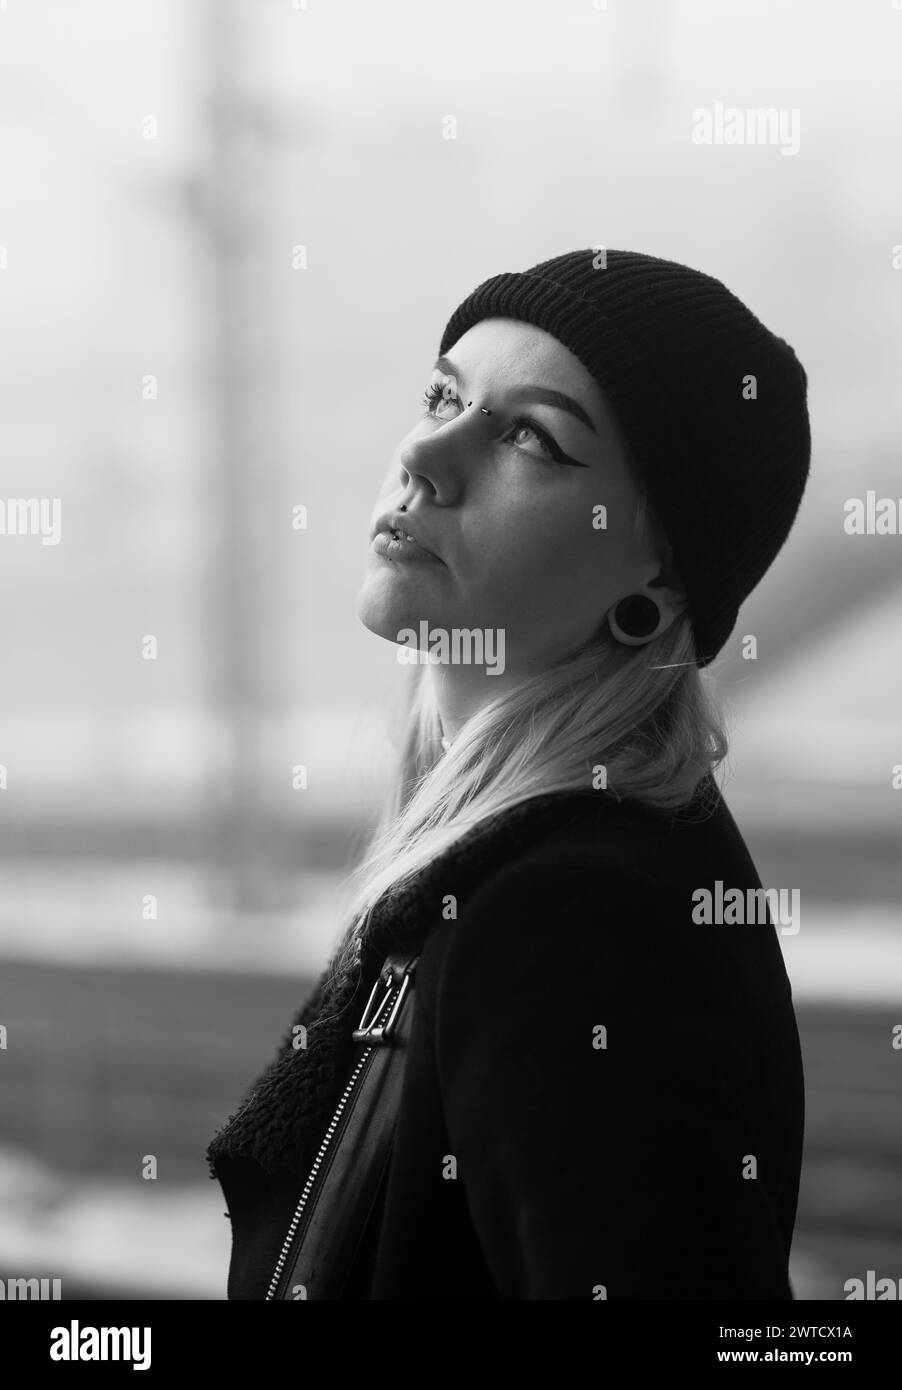 Edgy female model with piercings, beanie and blond hair. Dark tones and blurry background Stock Photo